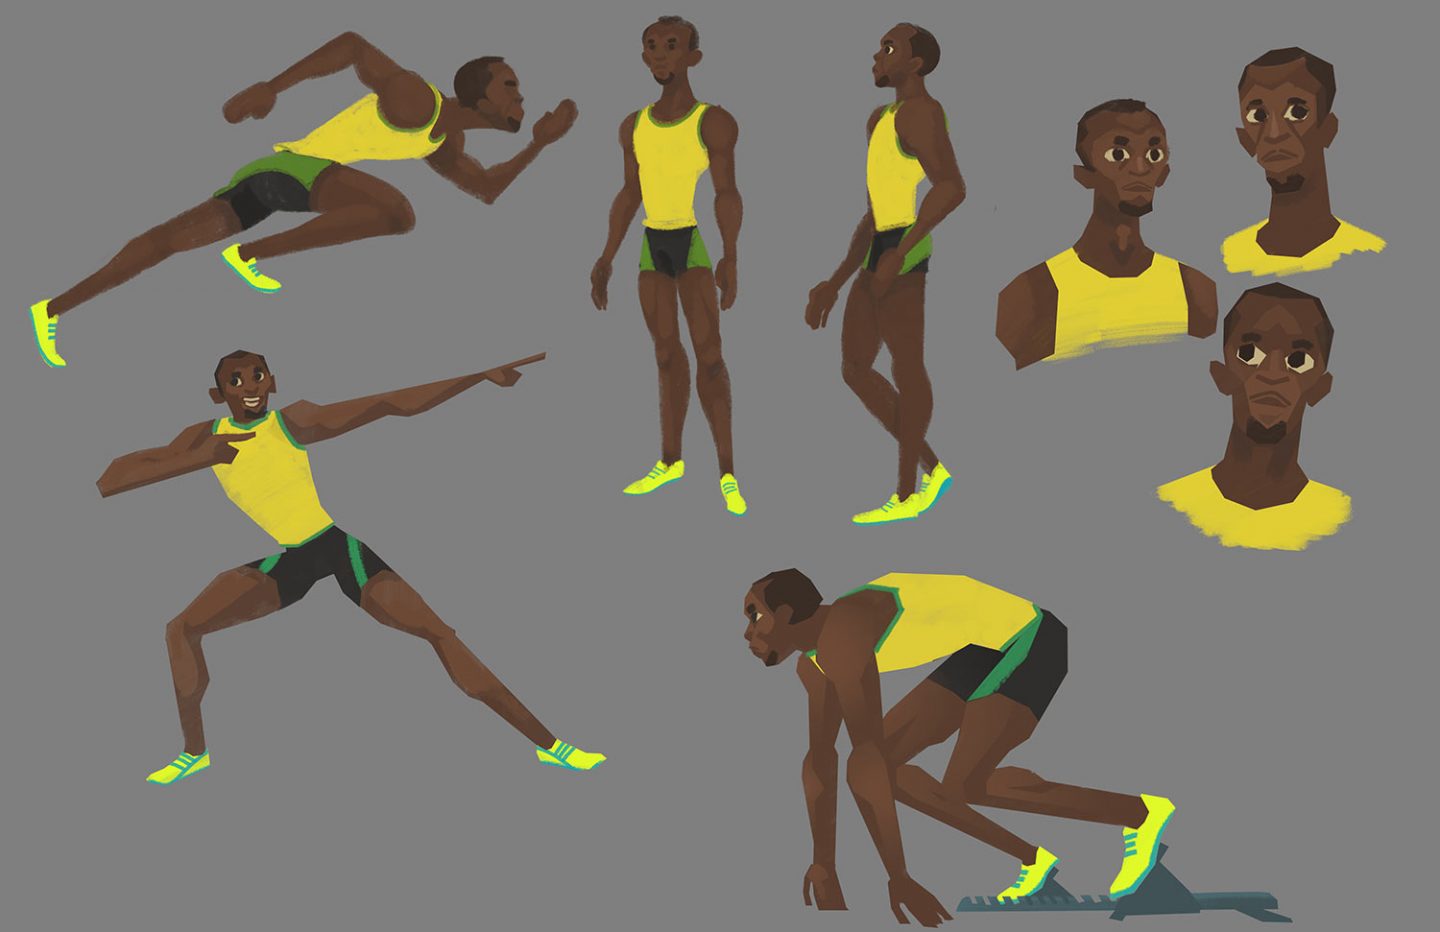 Usain Bolt character exploration by Kendra Phillips.